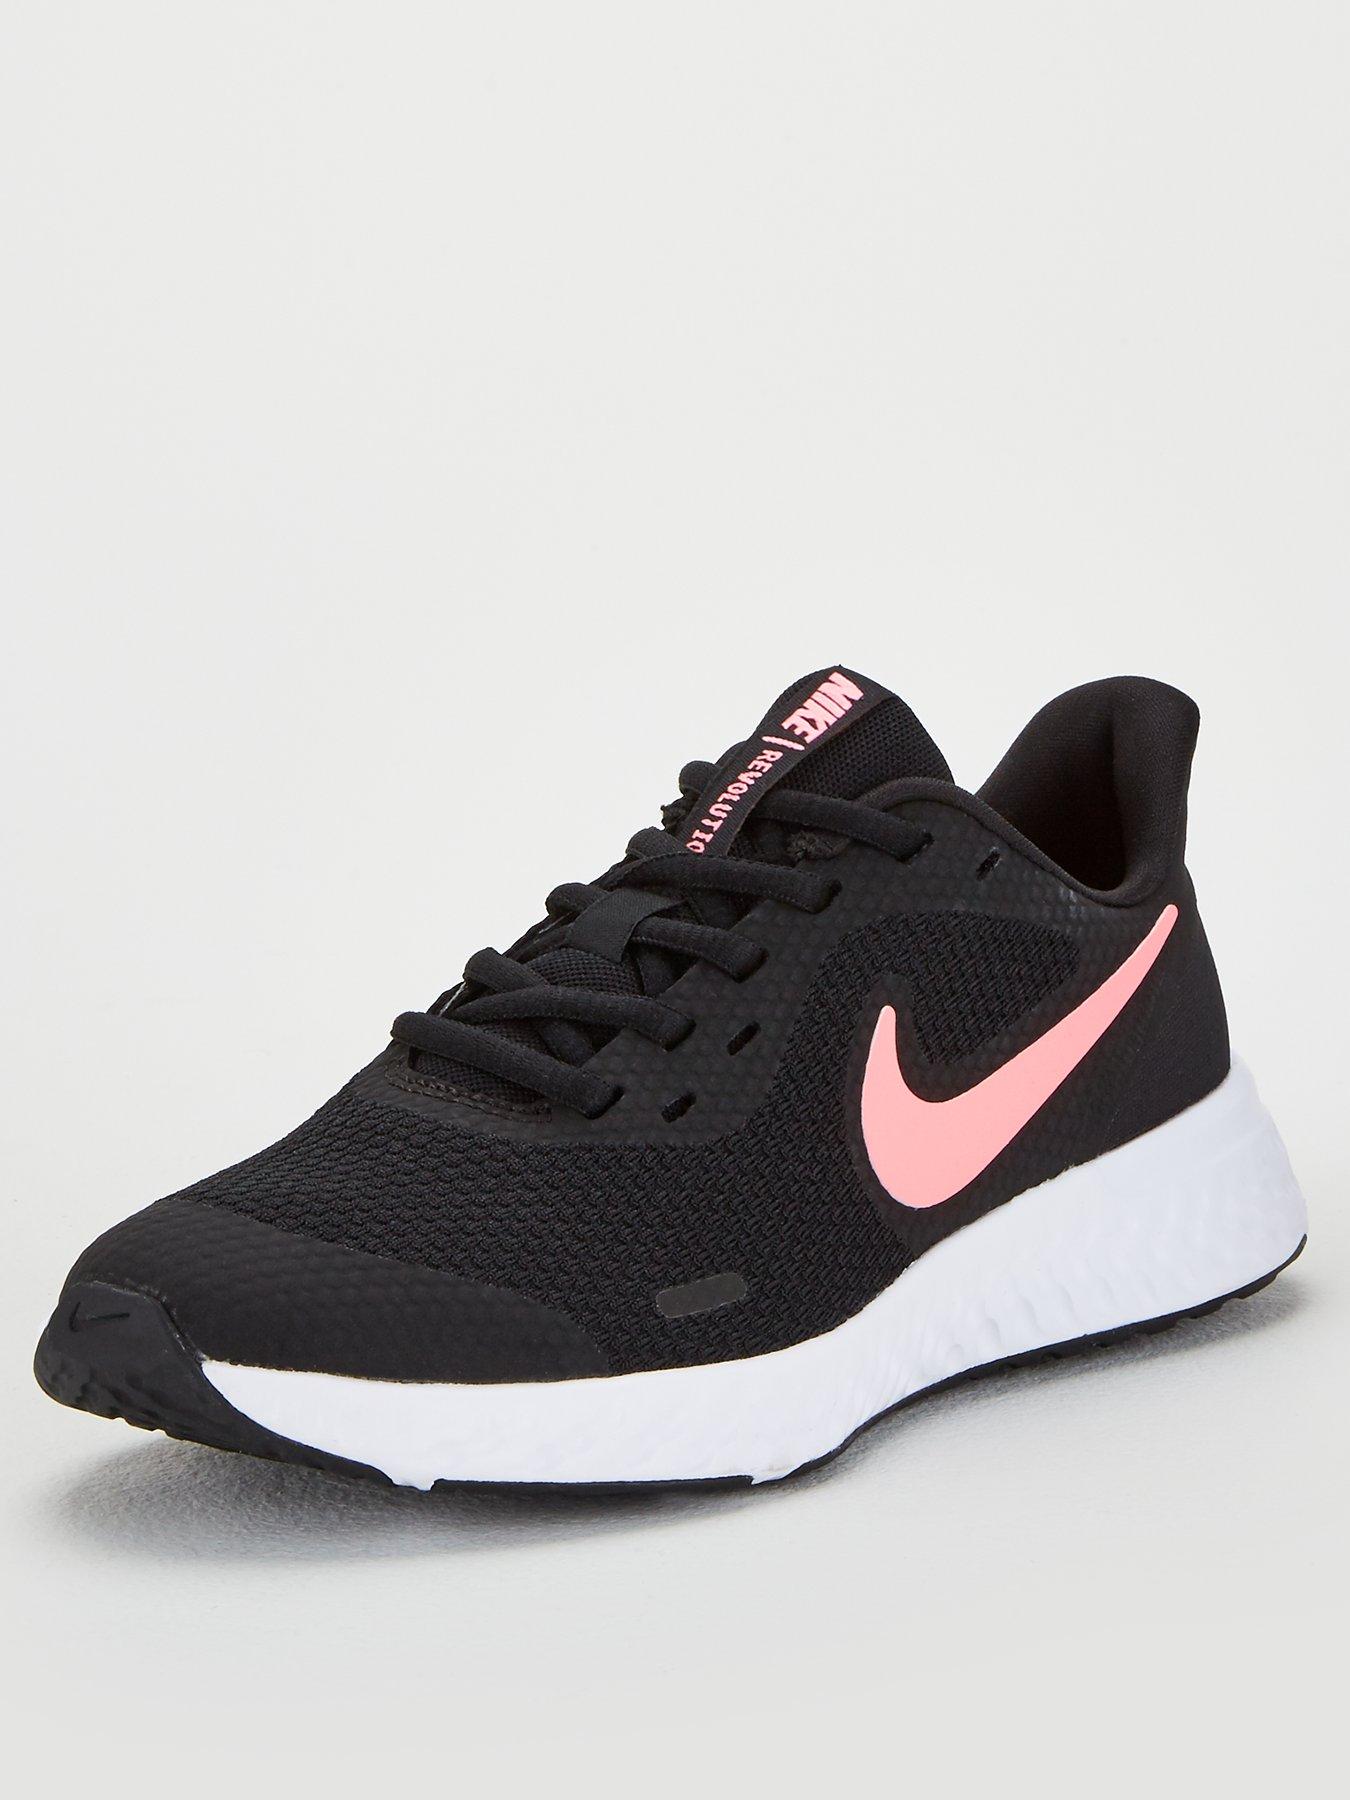 nike trainers pink tick